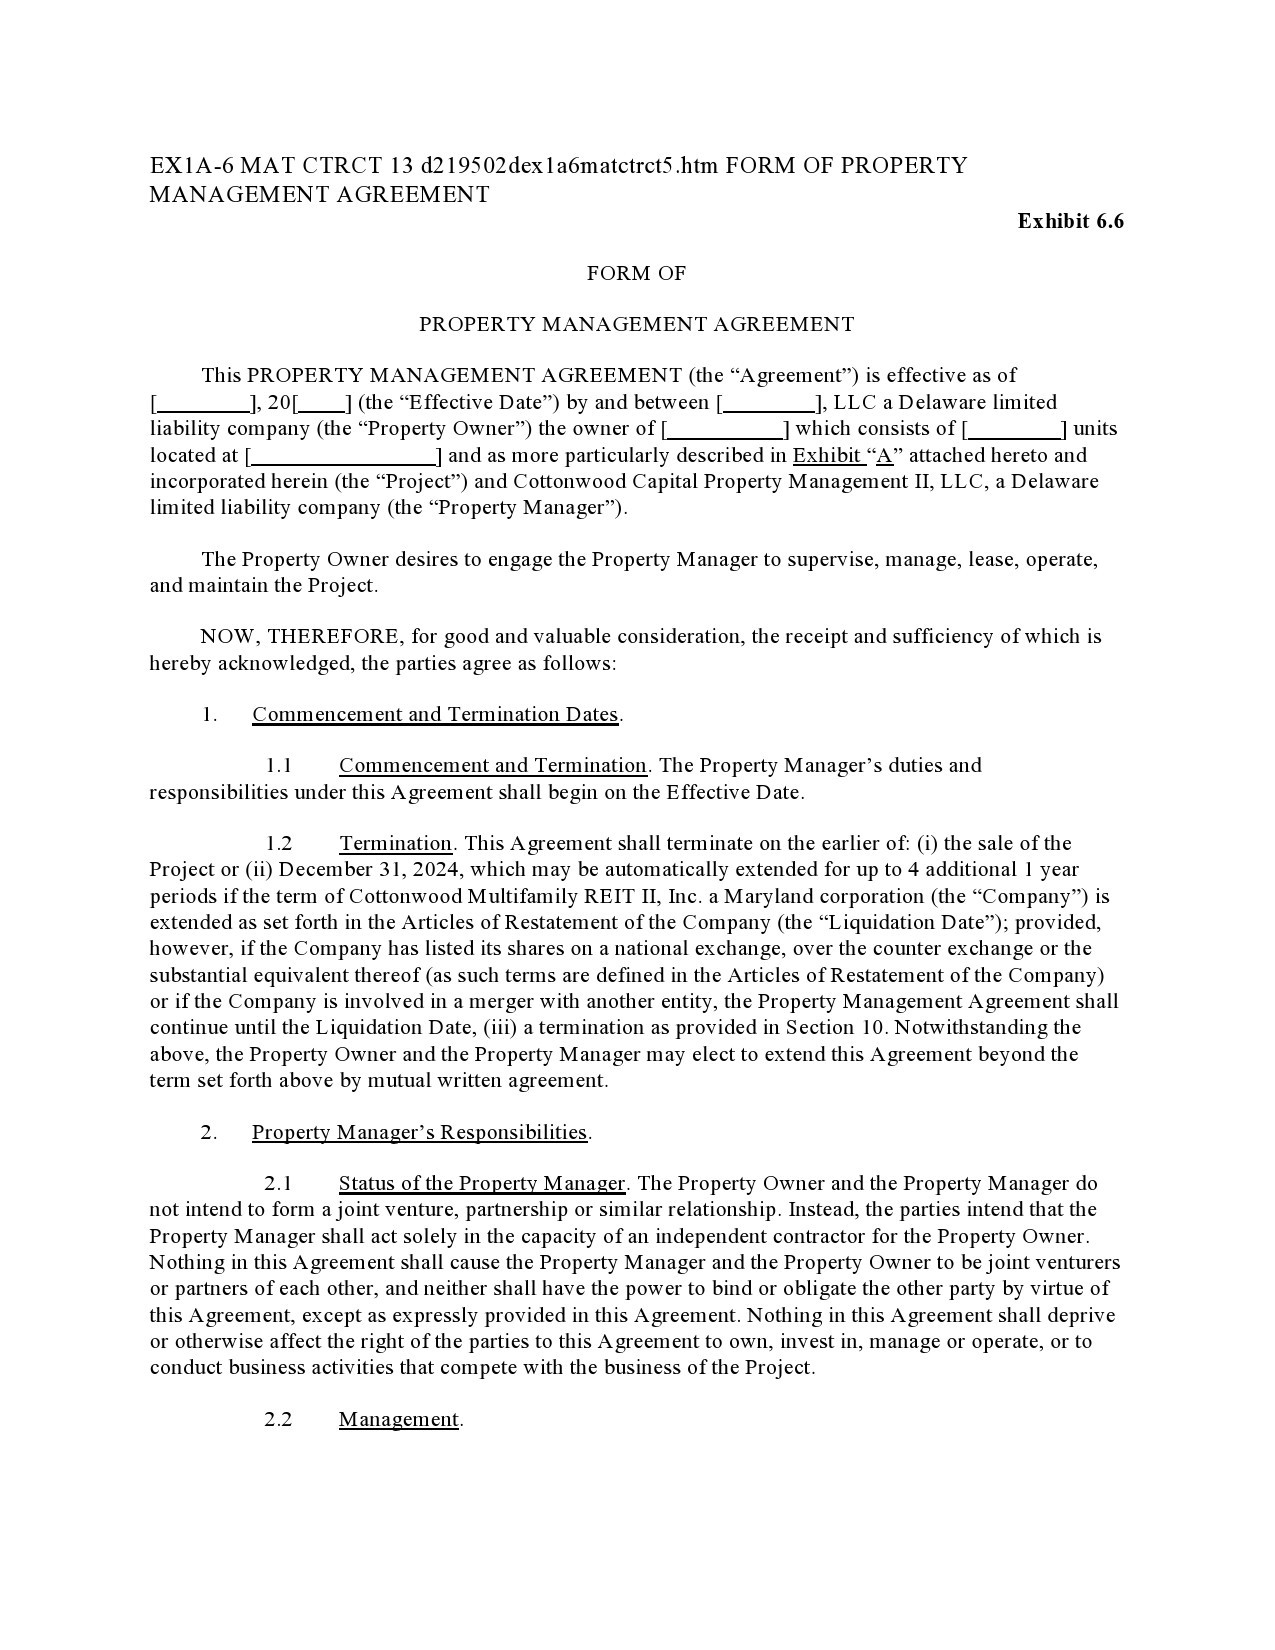 Free property management agreement 20